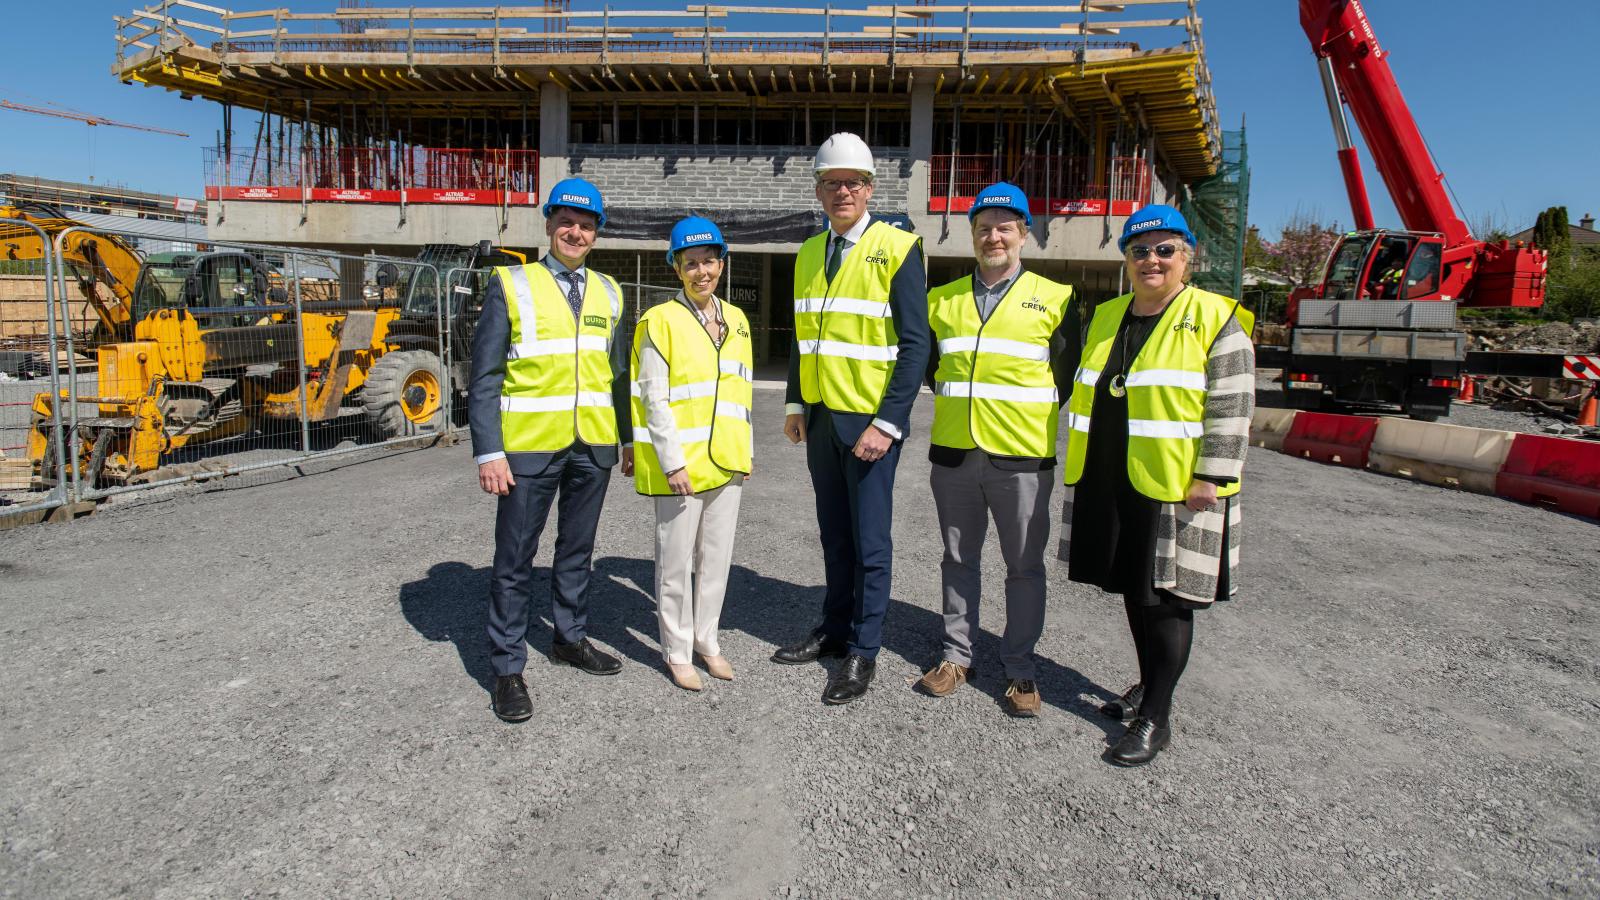 Minister Coveney visits construction site of new Creative Enterprise Hub (CREW) at ATU  Building a vision for innovative creative technology companies in the west of Ireland